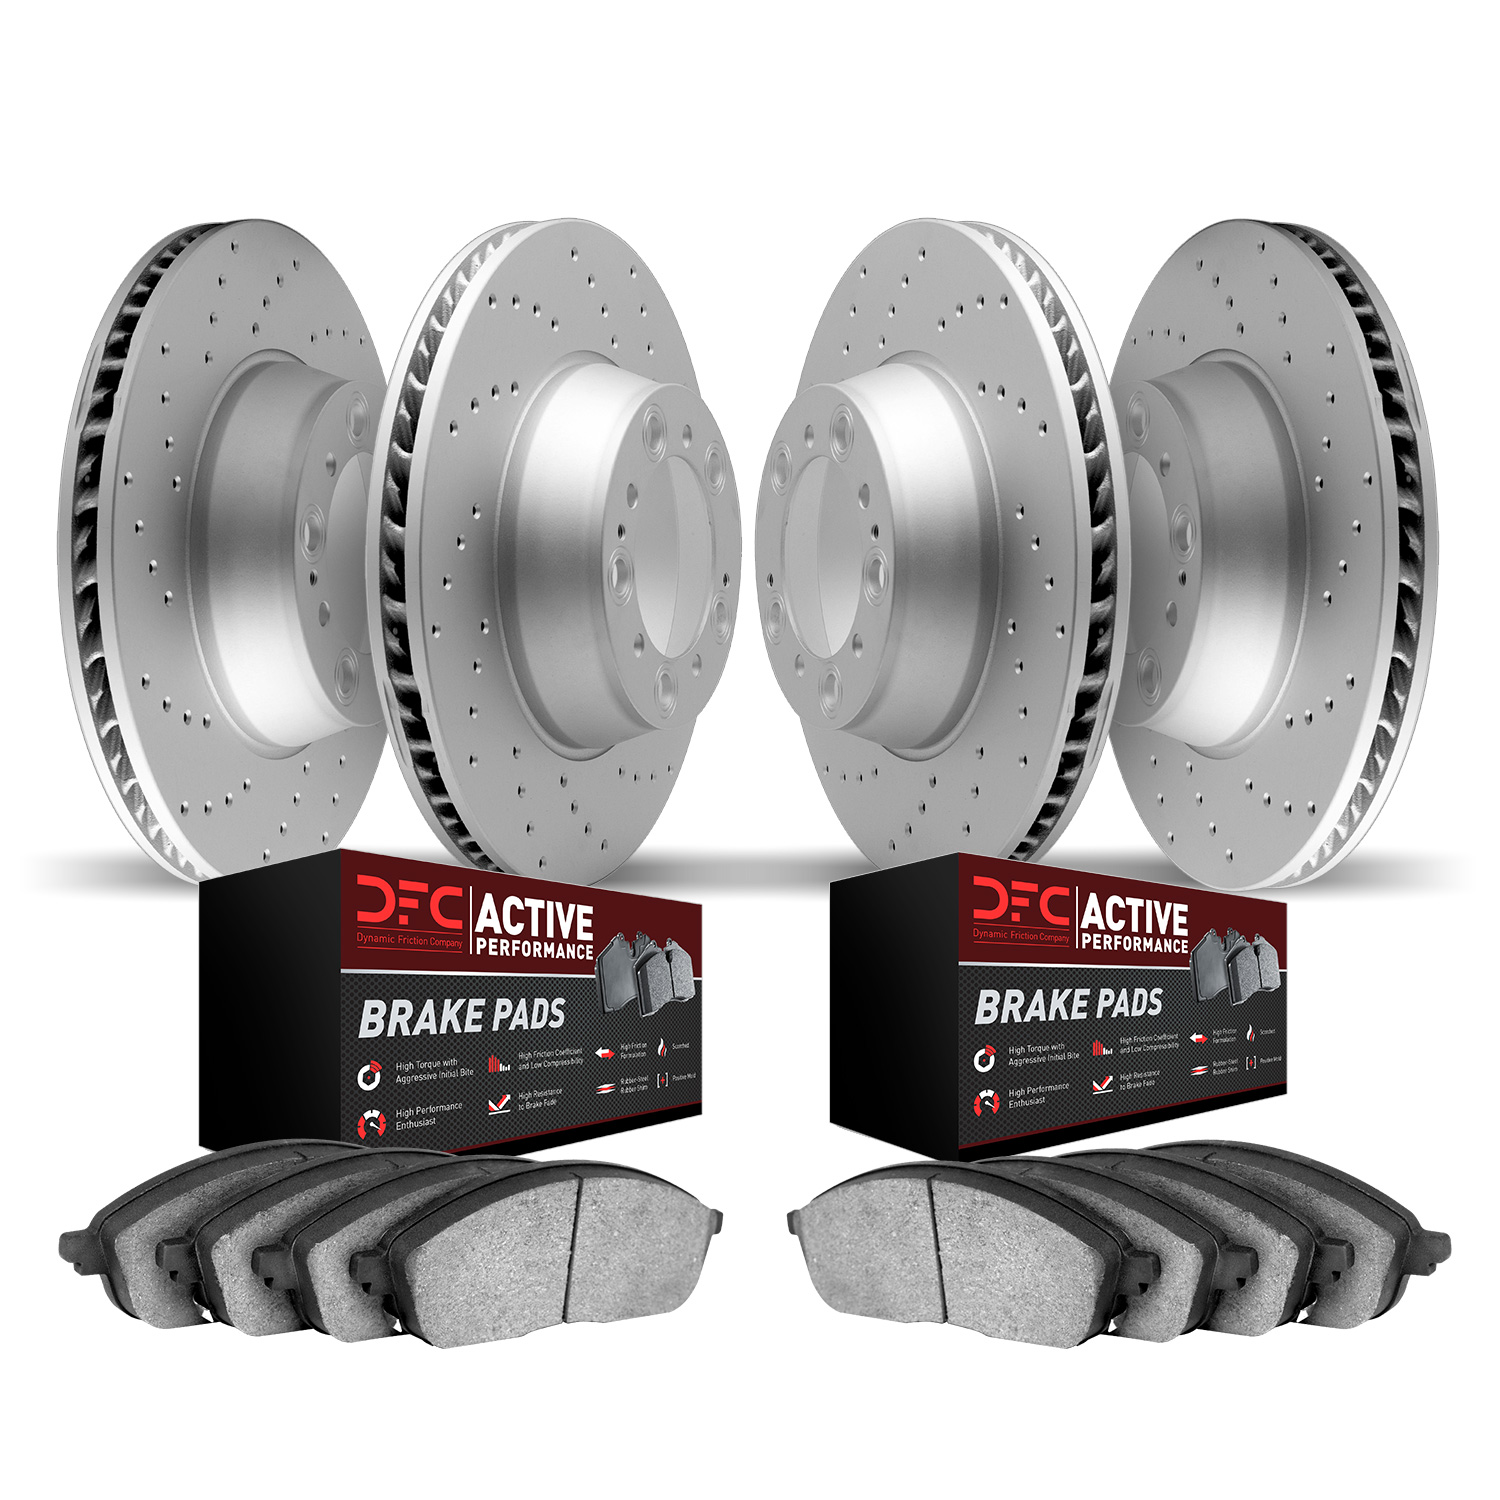 2704-67032 Geoperformance Drilled Brake Rotors with Active Performance Pads Kit, 2009-2021 Infiniti/Nissan, Position: Front and